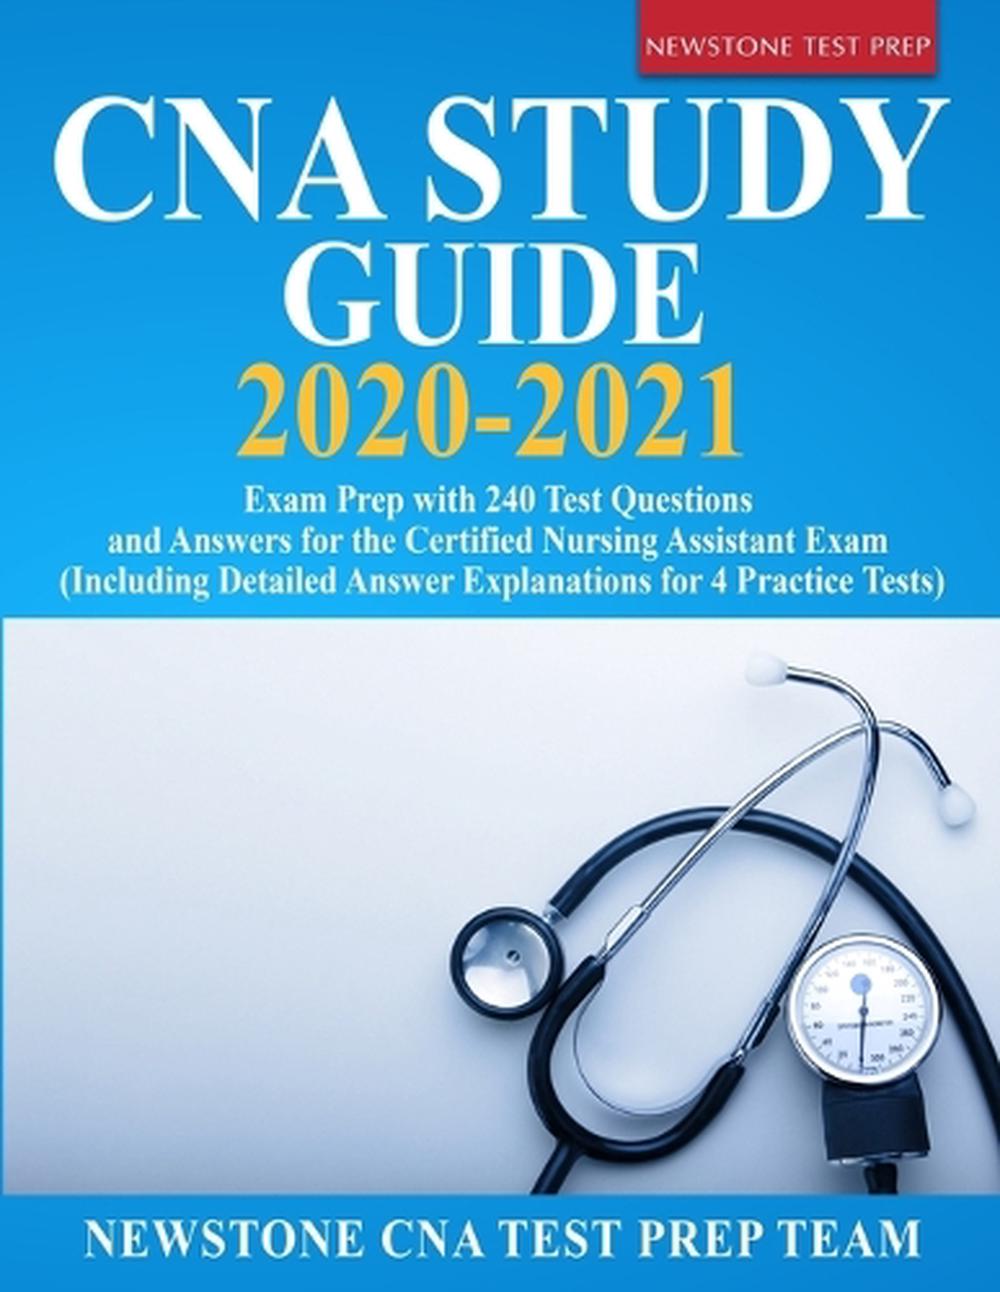 Cna Study Guide 20202021 Exam Prep with 240 Test Questions and